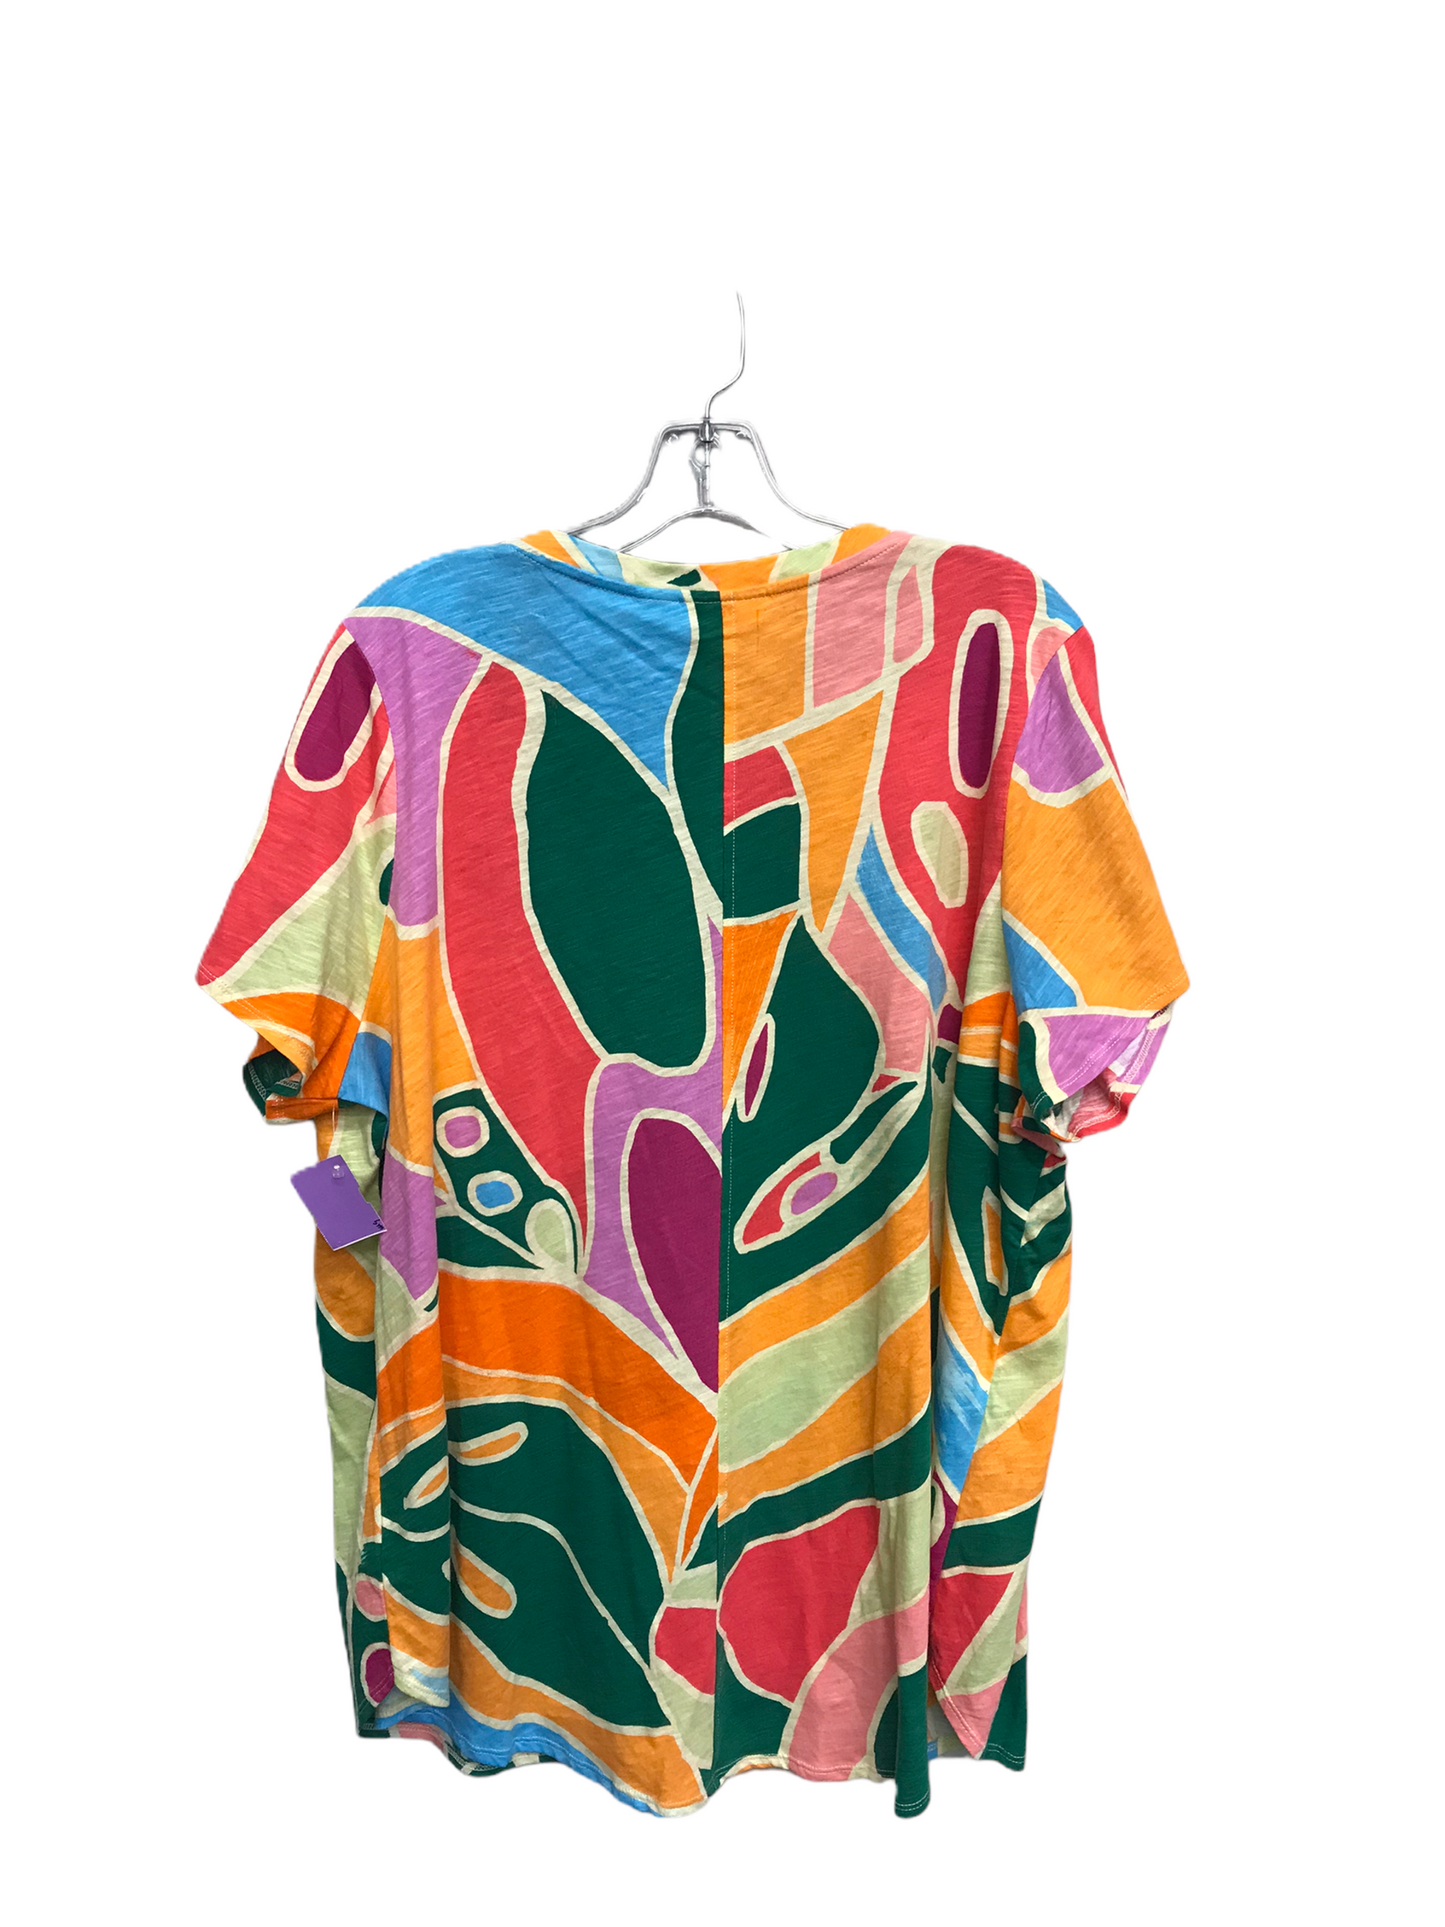 Multi-colored Top Short Sleeve By Christian Siriano, Size: 2x